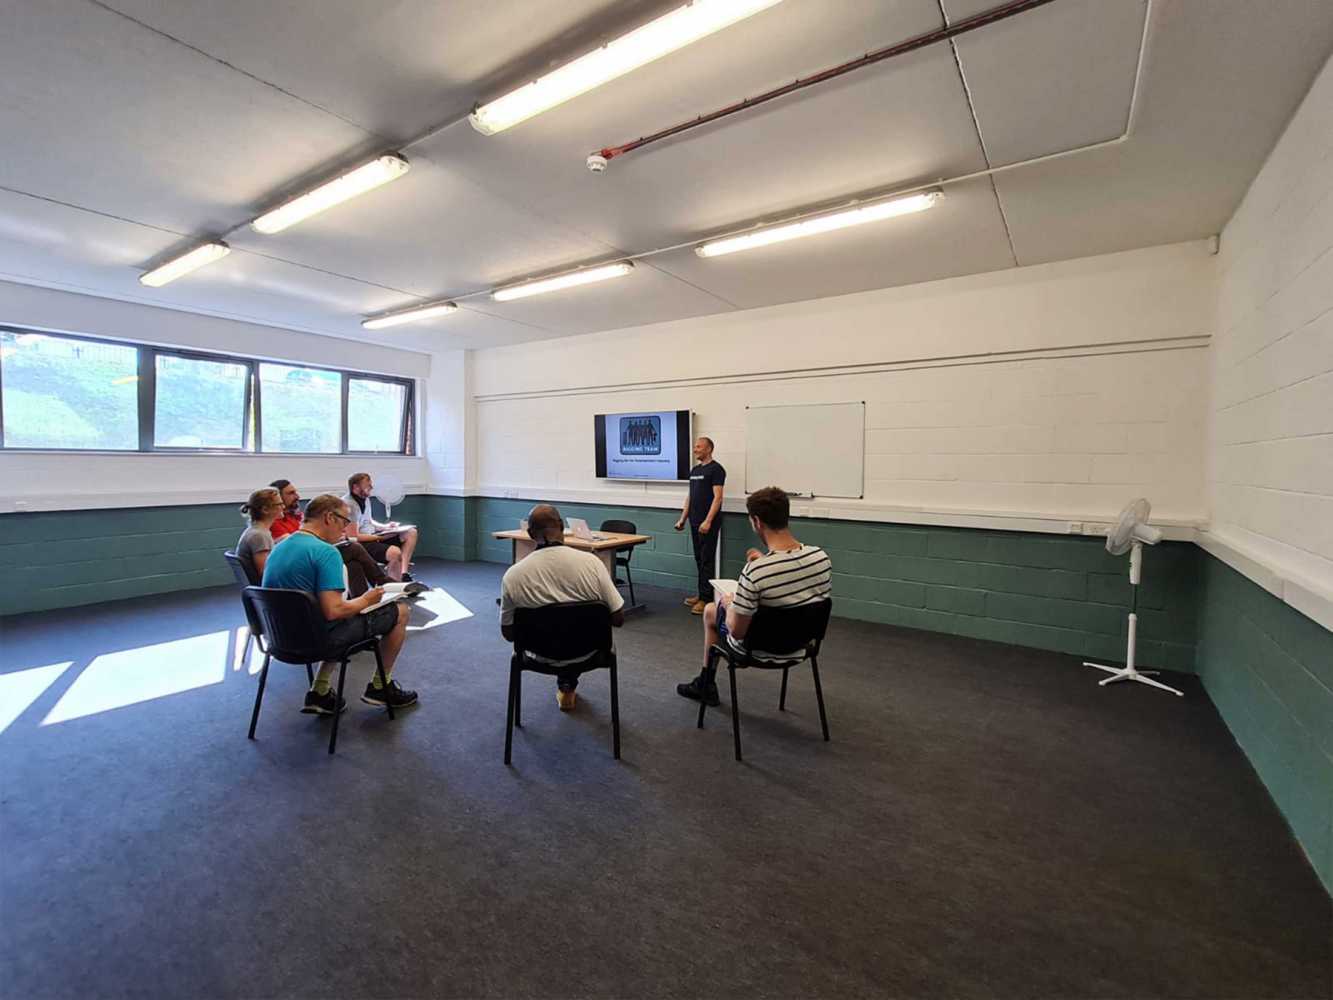 The centre features a generous classroom and presentation space, along with a practical training area